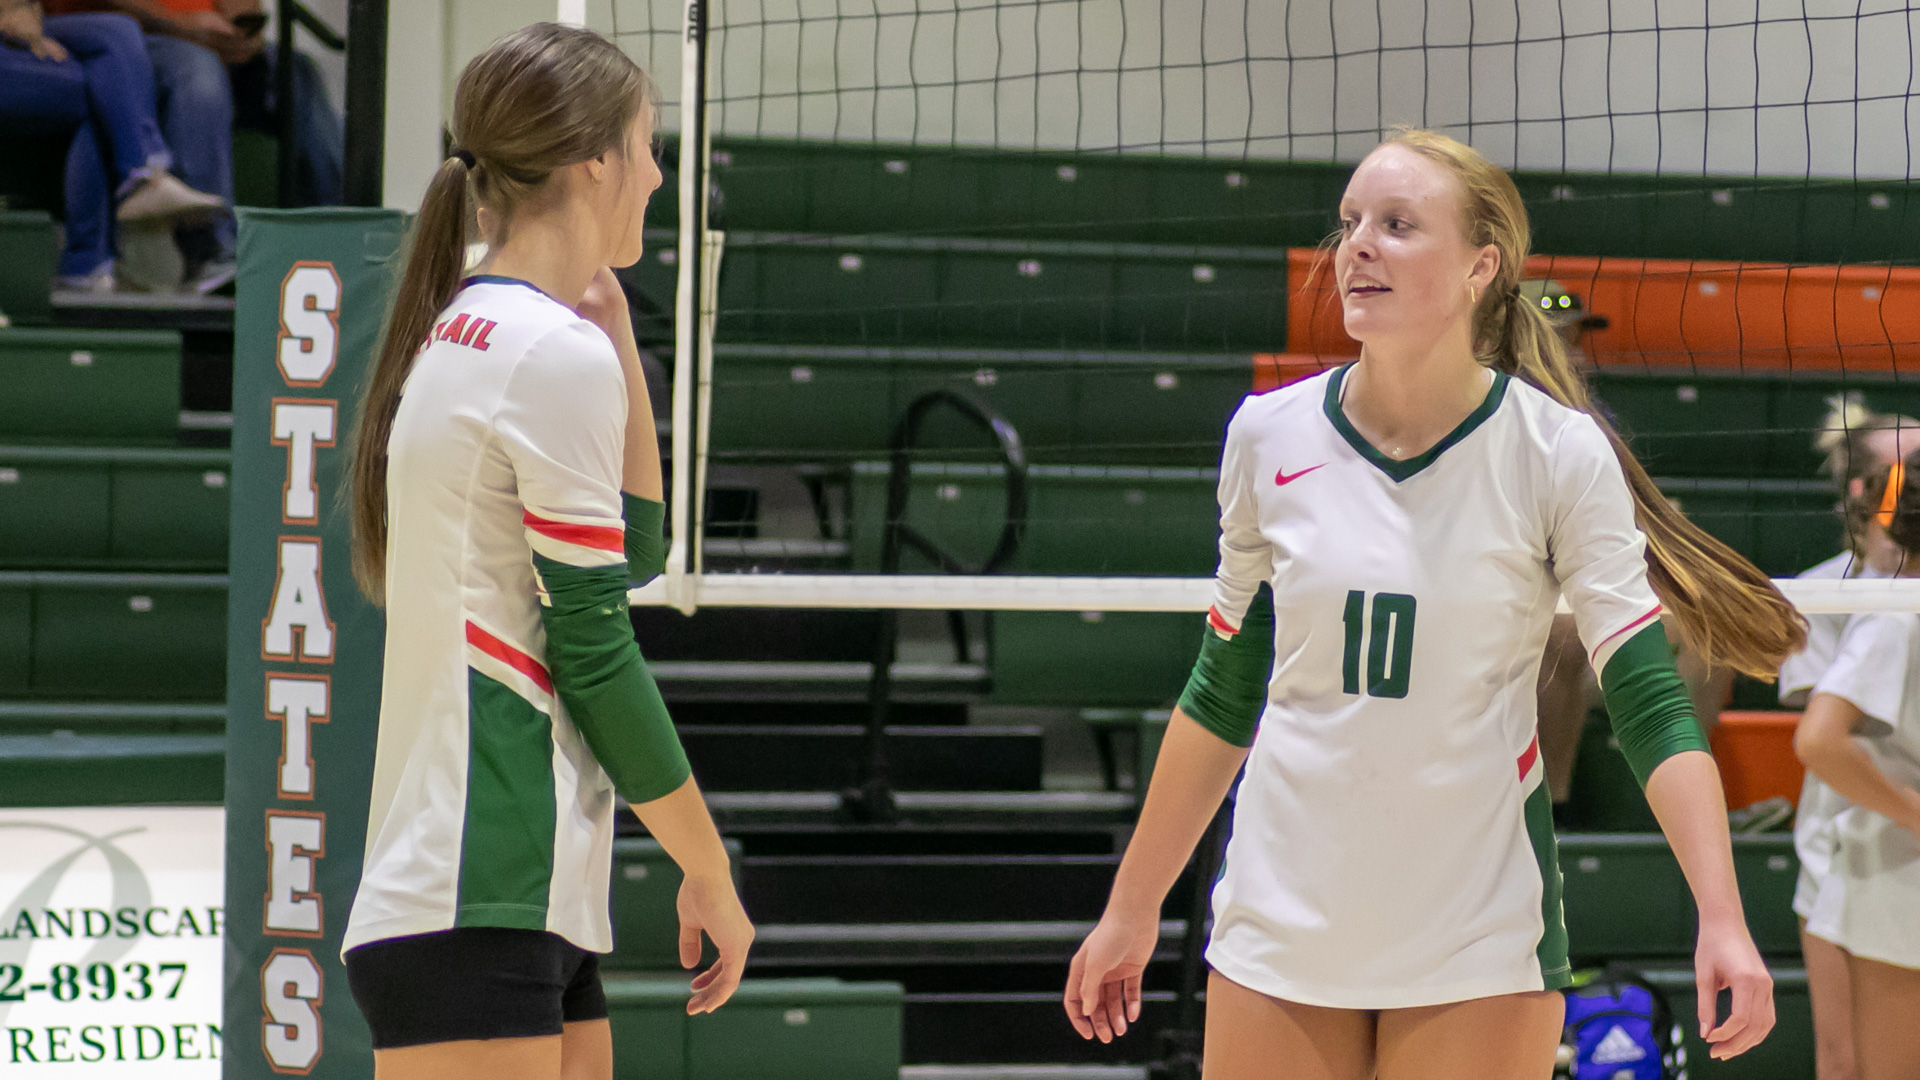 Faith Shull, left, and Hannah Saucerman, right, talk with each other in front of the net prior or a game.